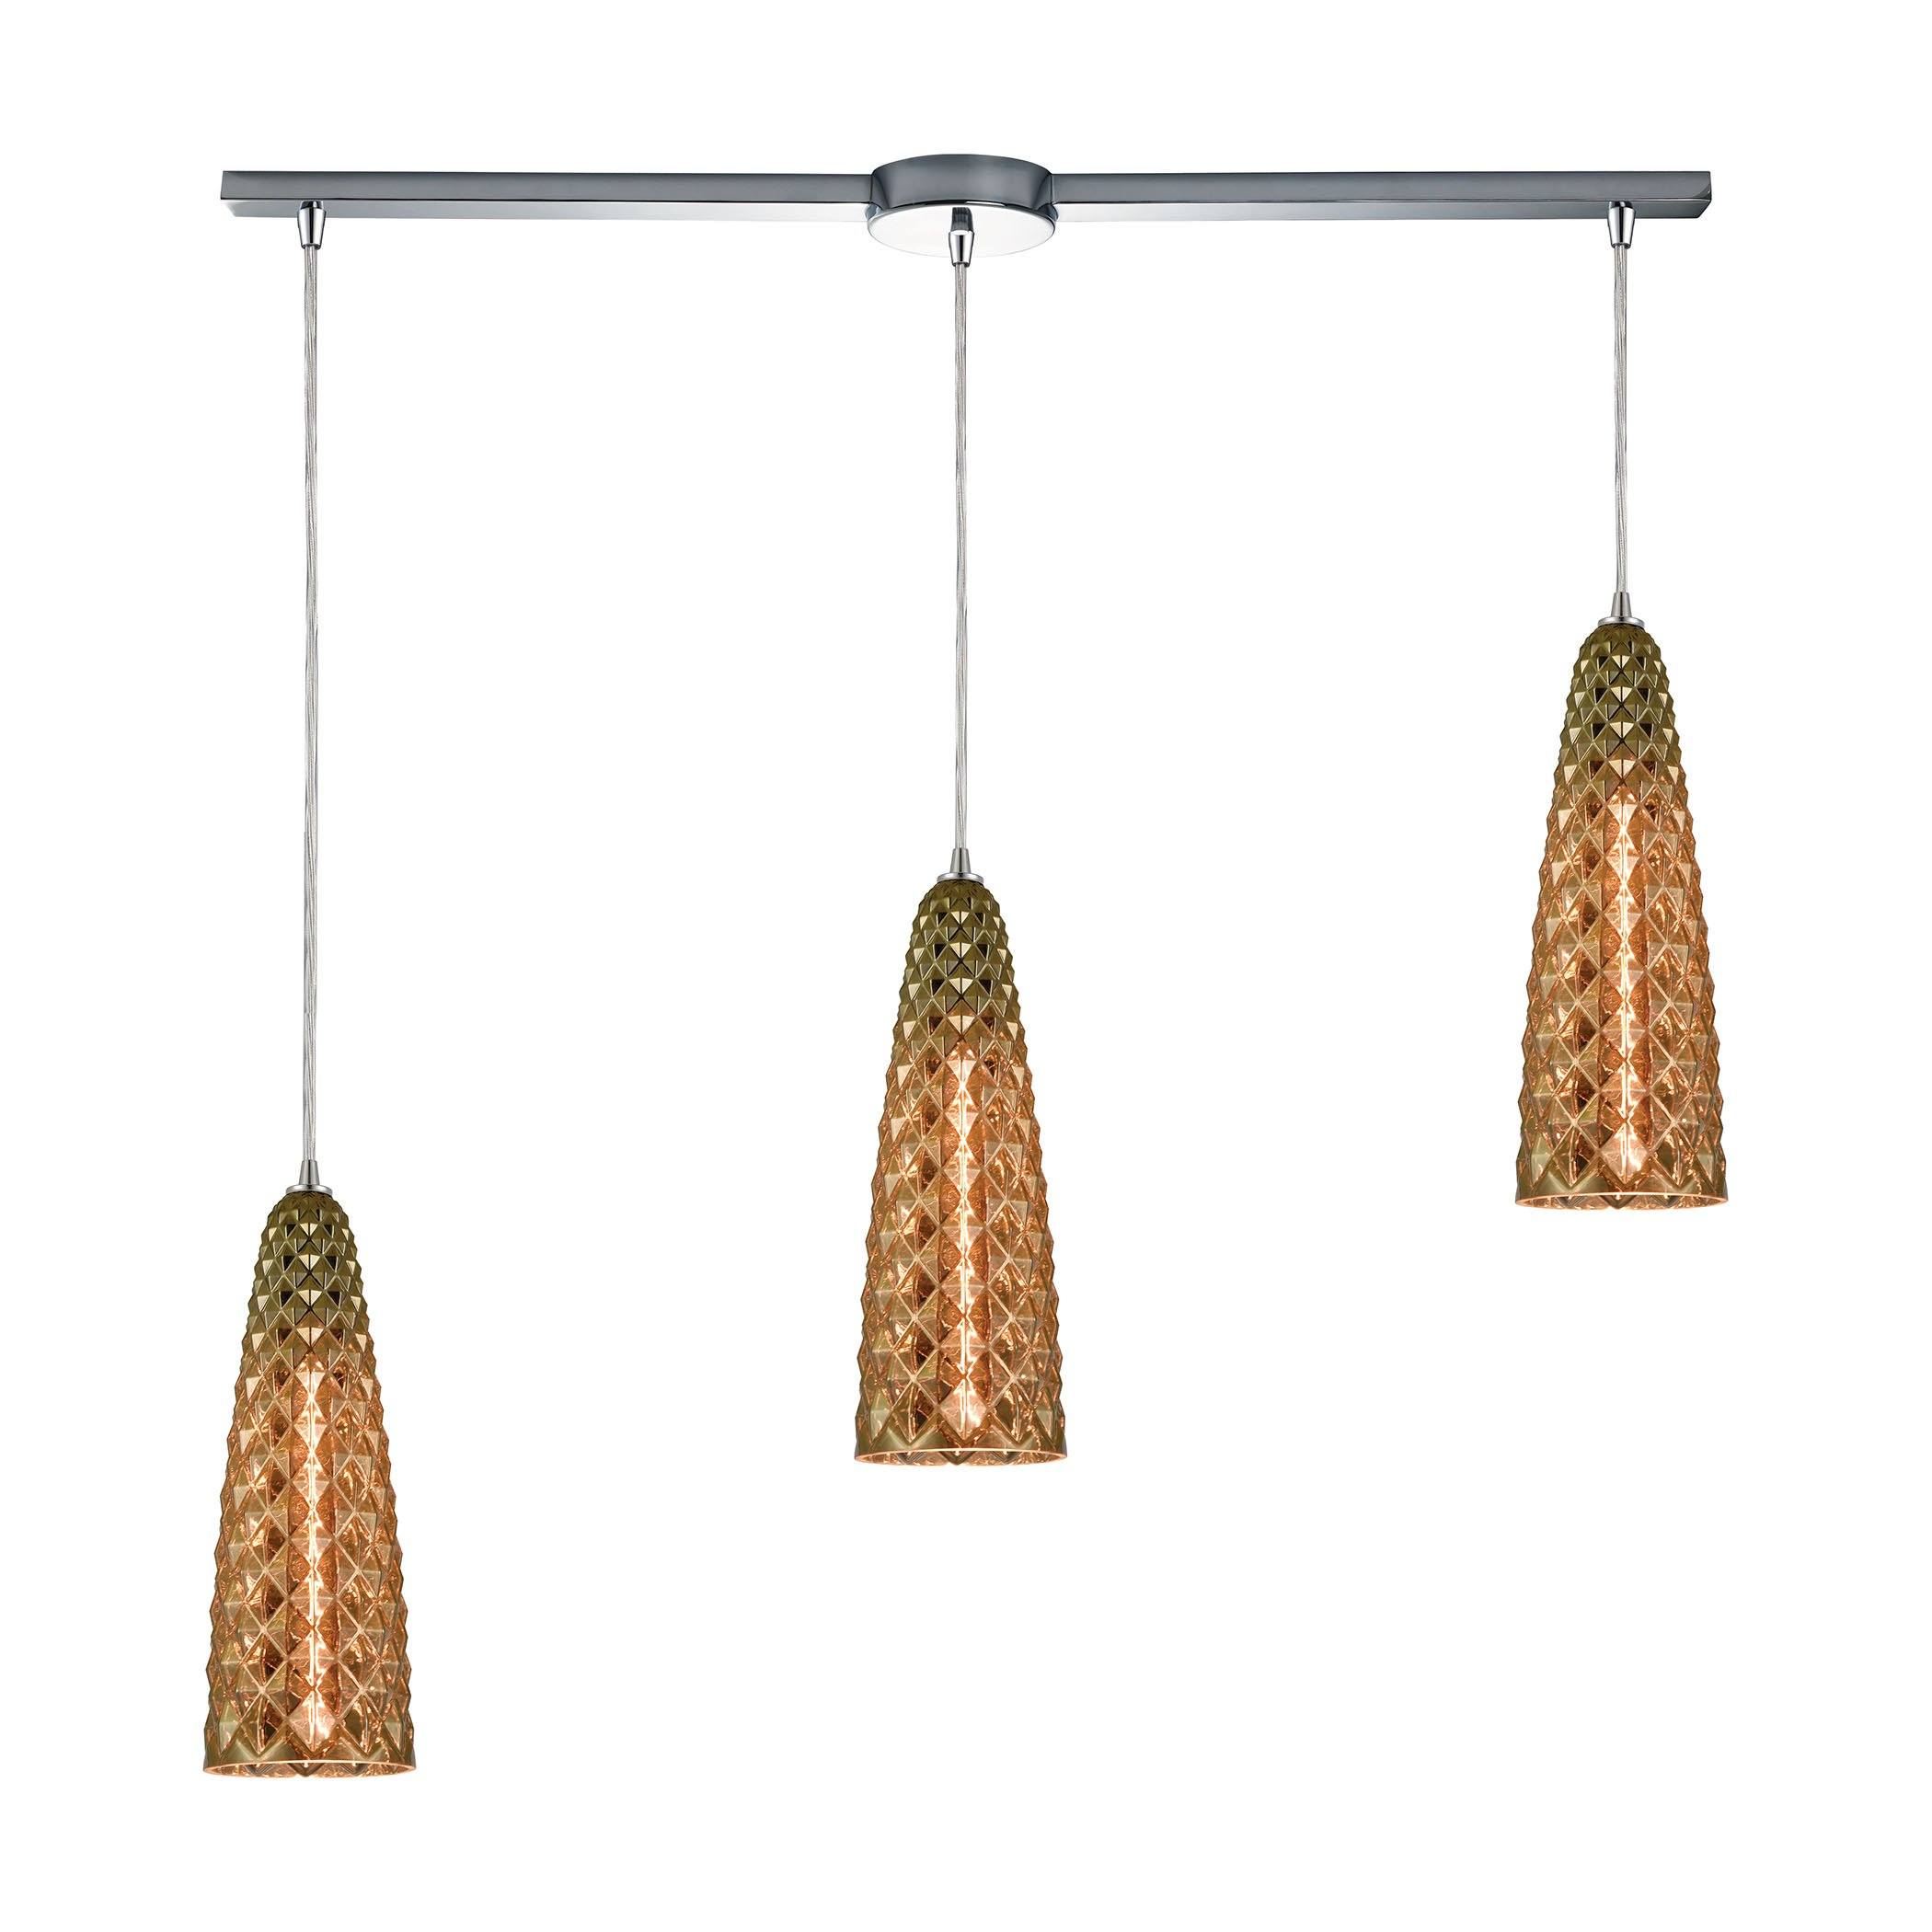 Glitzy 3-Light Pendant in Polished Chrome with Golden Bronze Plated Glass Ceiling Elk Lighting 